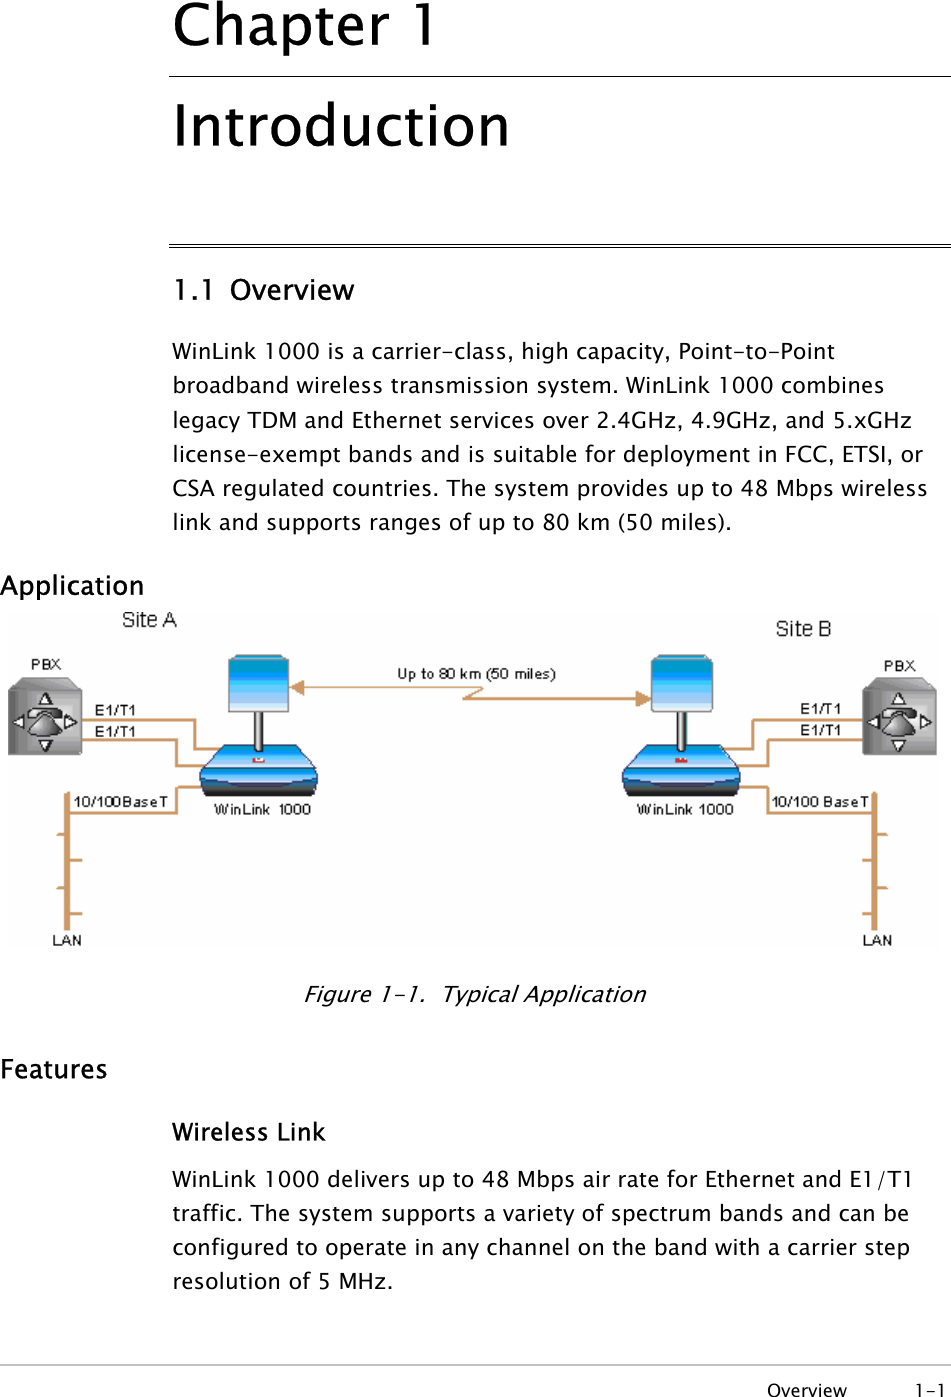   Overview 1-1 Chapter  1 Introduction 1.1 Overview WinLink 1000 is a carrier-class, high capacity, Point-to-Point broadband wireless transmission system. WinLink 1000 combines legacy TDM and Ethernet services over 2.4GHz, 4.9GHz, and 5.xGHz license-exempt bands and is suitable for deployment in FCC, ETSI, or CSA regulated countries. The system provides up to 48 Mbps wireless link and supports ranges of up to 80 km (50 miles). Application  Figure 1-1.  Typical Application Features Wireless Link WinLink 1000 delivers up to 48 Mbps air rate for Ethernet and E1/T1 traffic. The system supports a variety of spectrum bands and can be configured to operate in any channel on the band with a carrier step resolution of 5 MHz. 